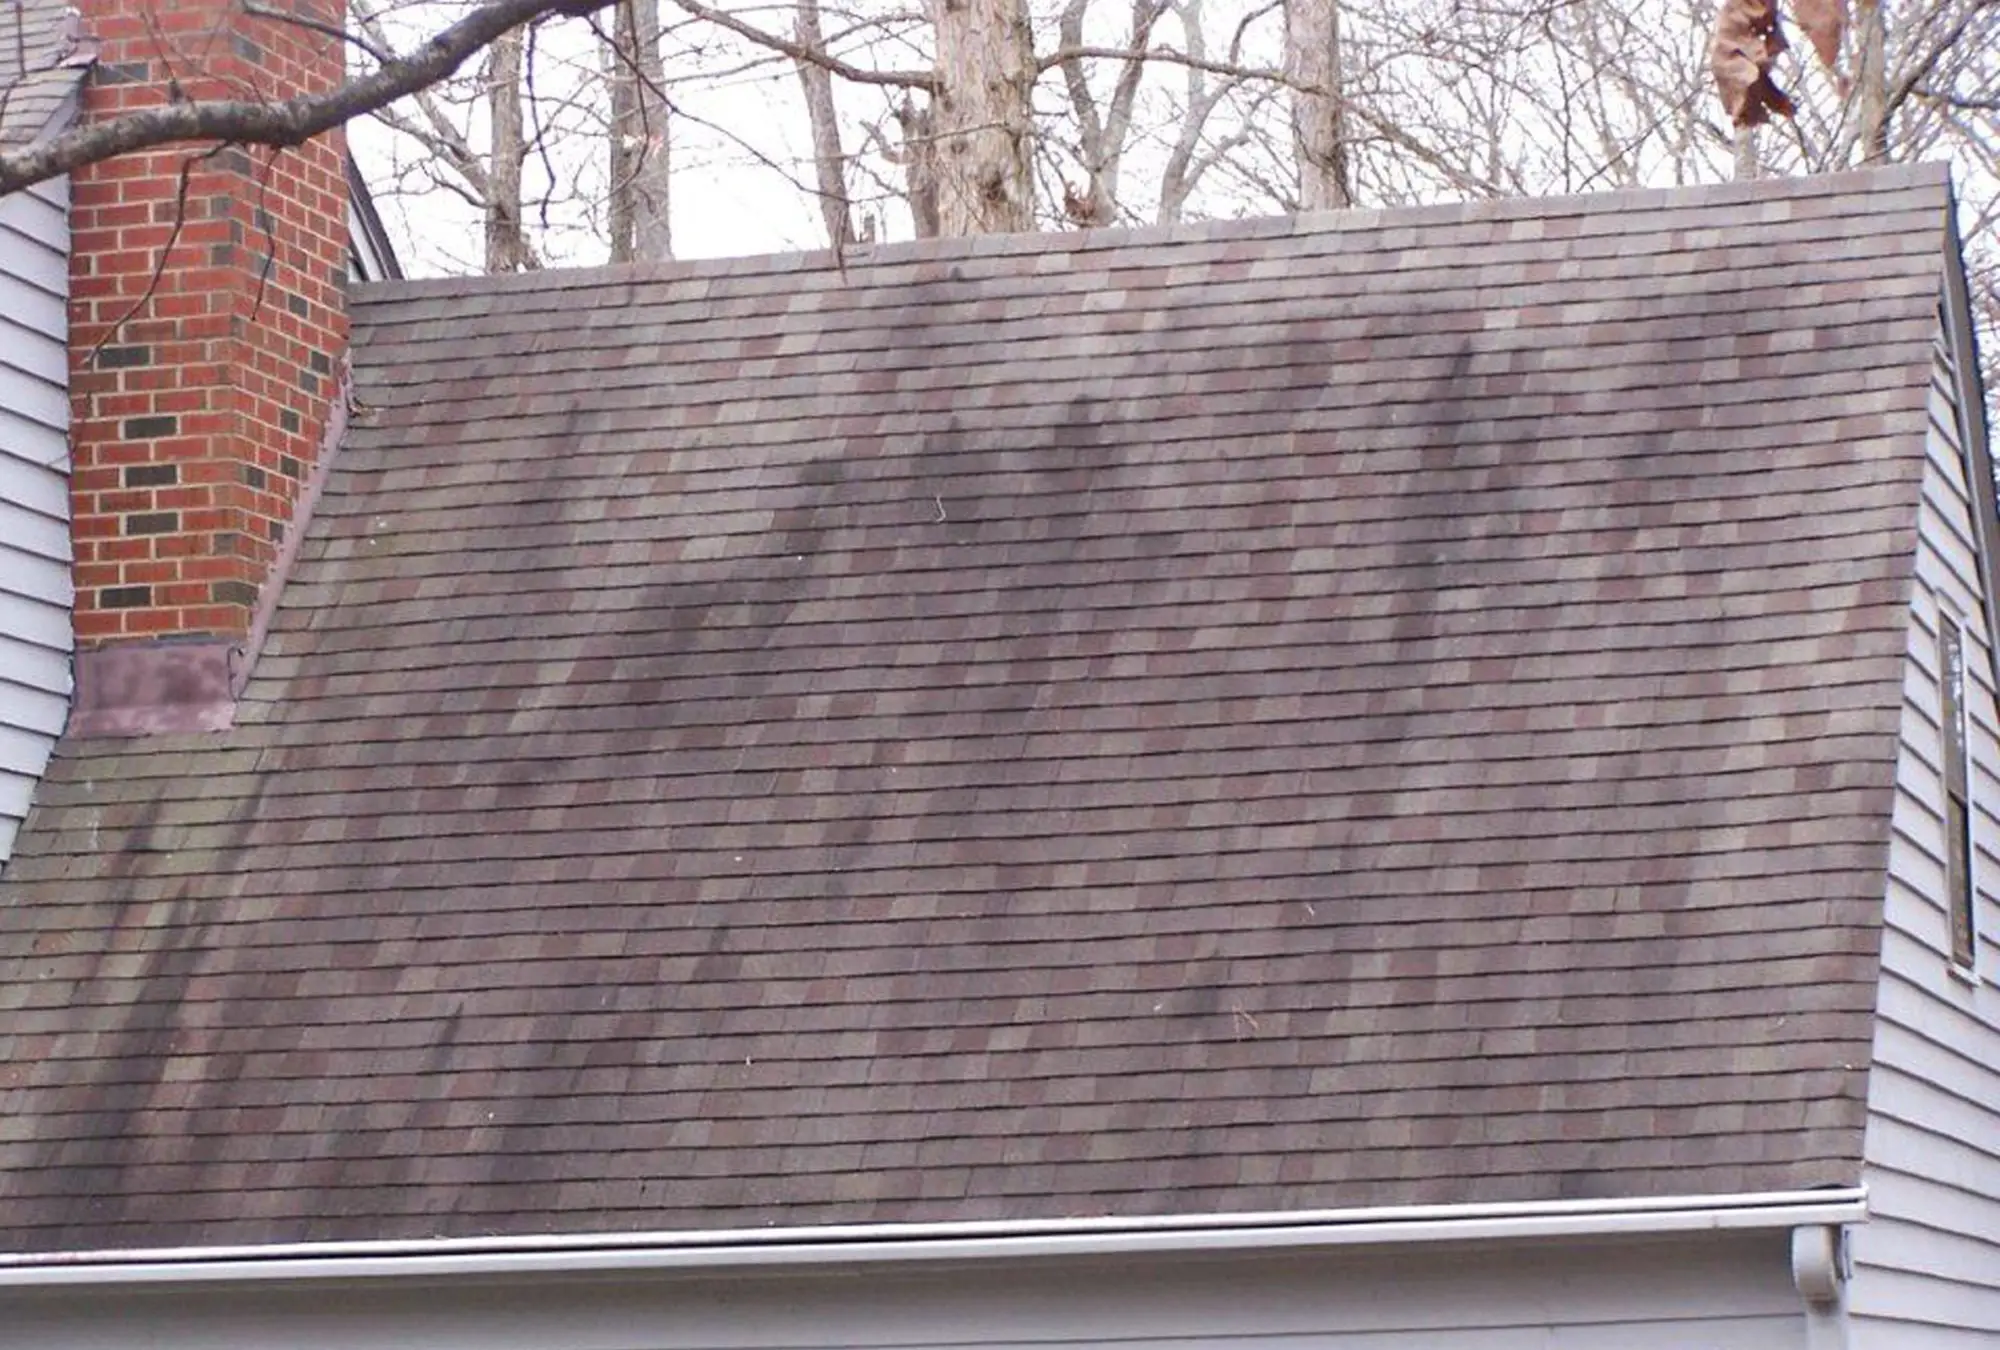 Roof Cleaning: Are Those Black Streaks on My Roof?